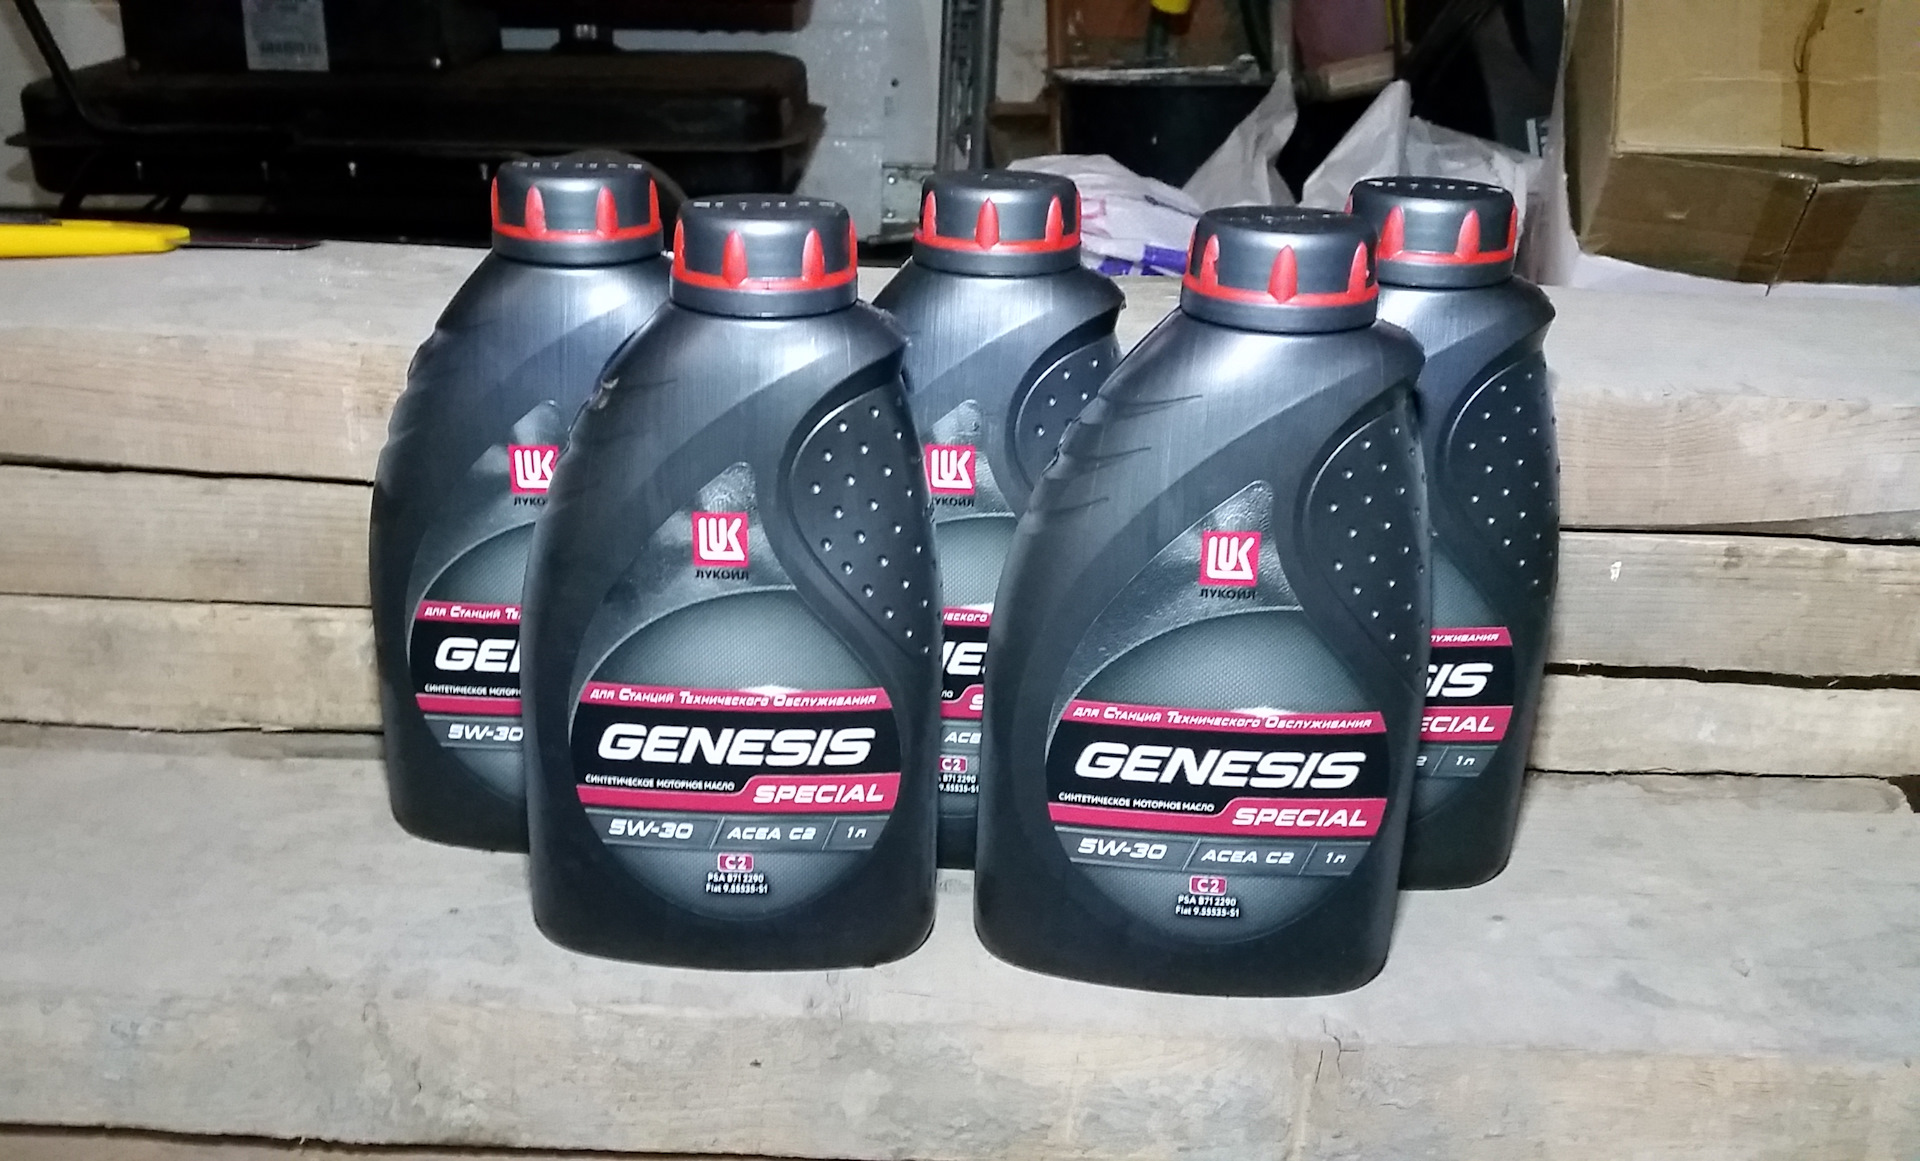 Масло лукойл special 5w30. Lukoil Genesis Special c2 5w-30. Genesis Special 5w30. Лукойл Генезис специал 5w30 с4.